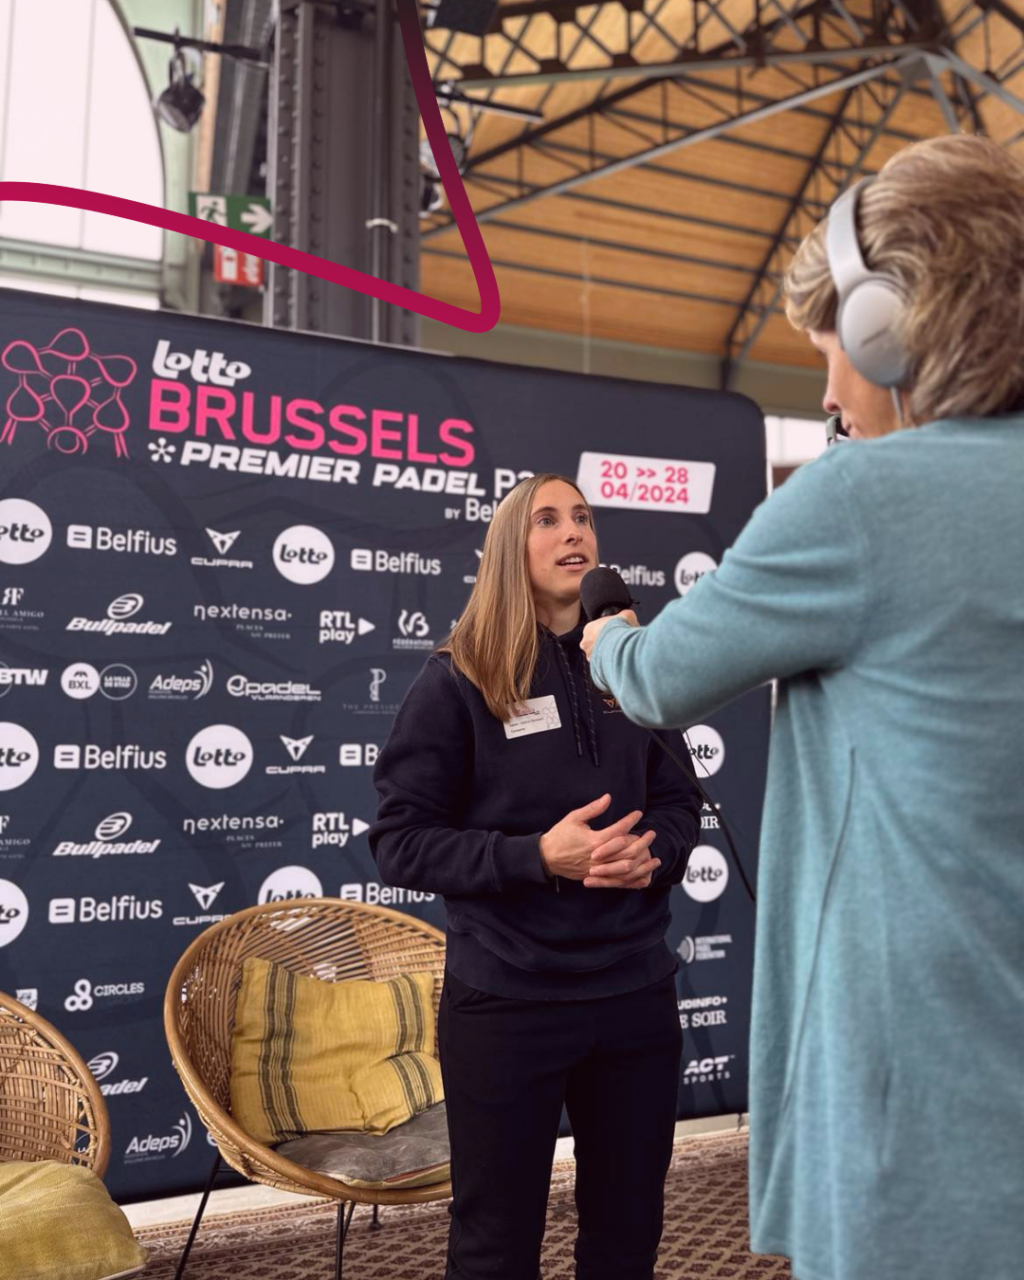 Interview of a Padel player